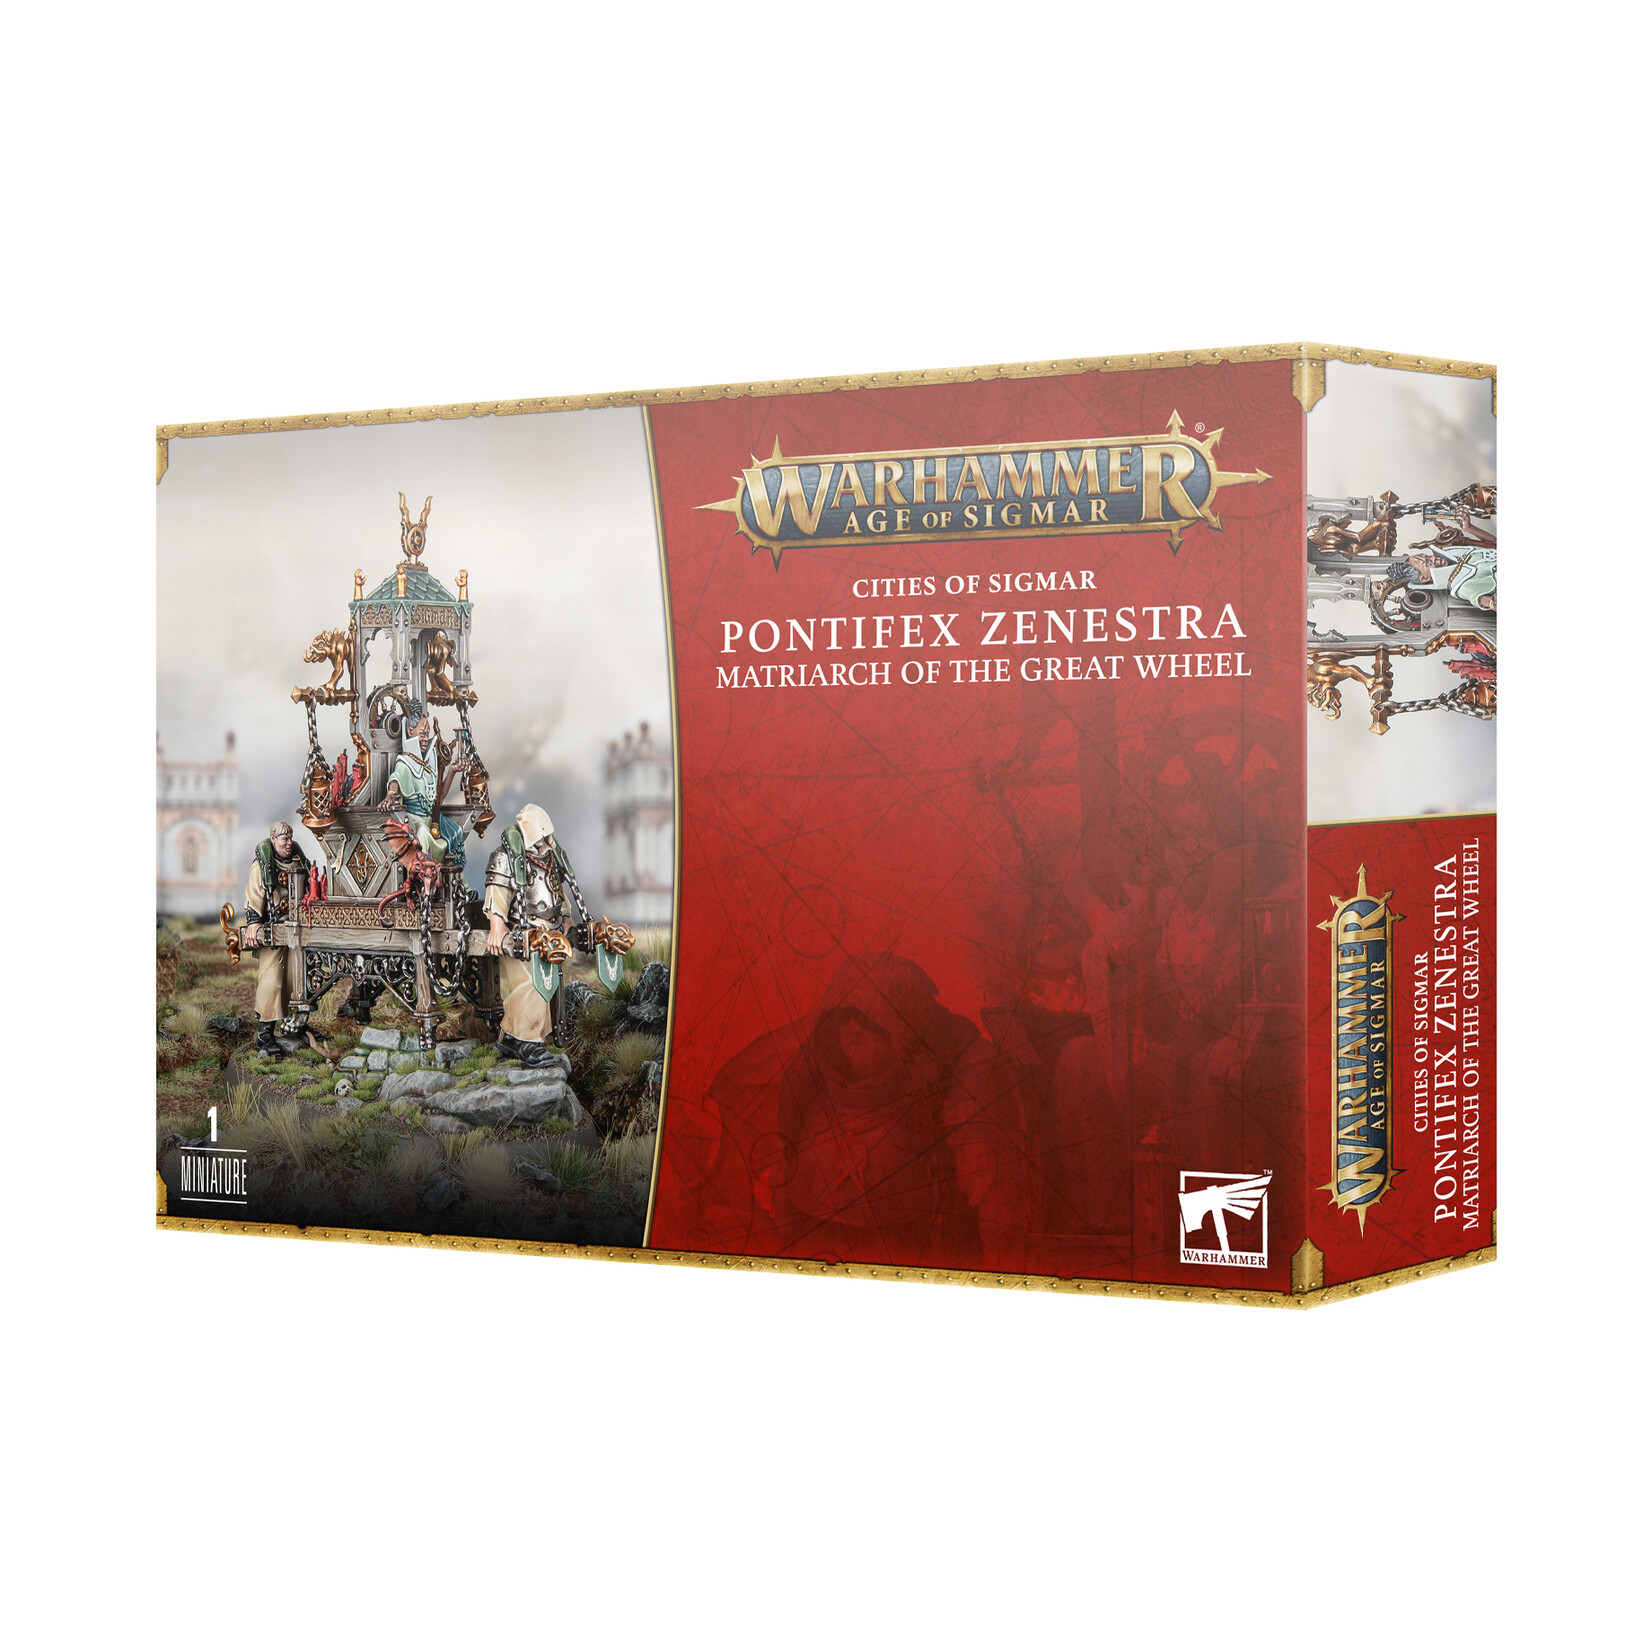 Games Workshop Warhammer Age of Sigmar Cities of Sigmar Pontifex Zenestra Matriarch of the Great Wheel